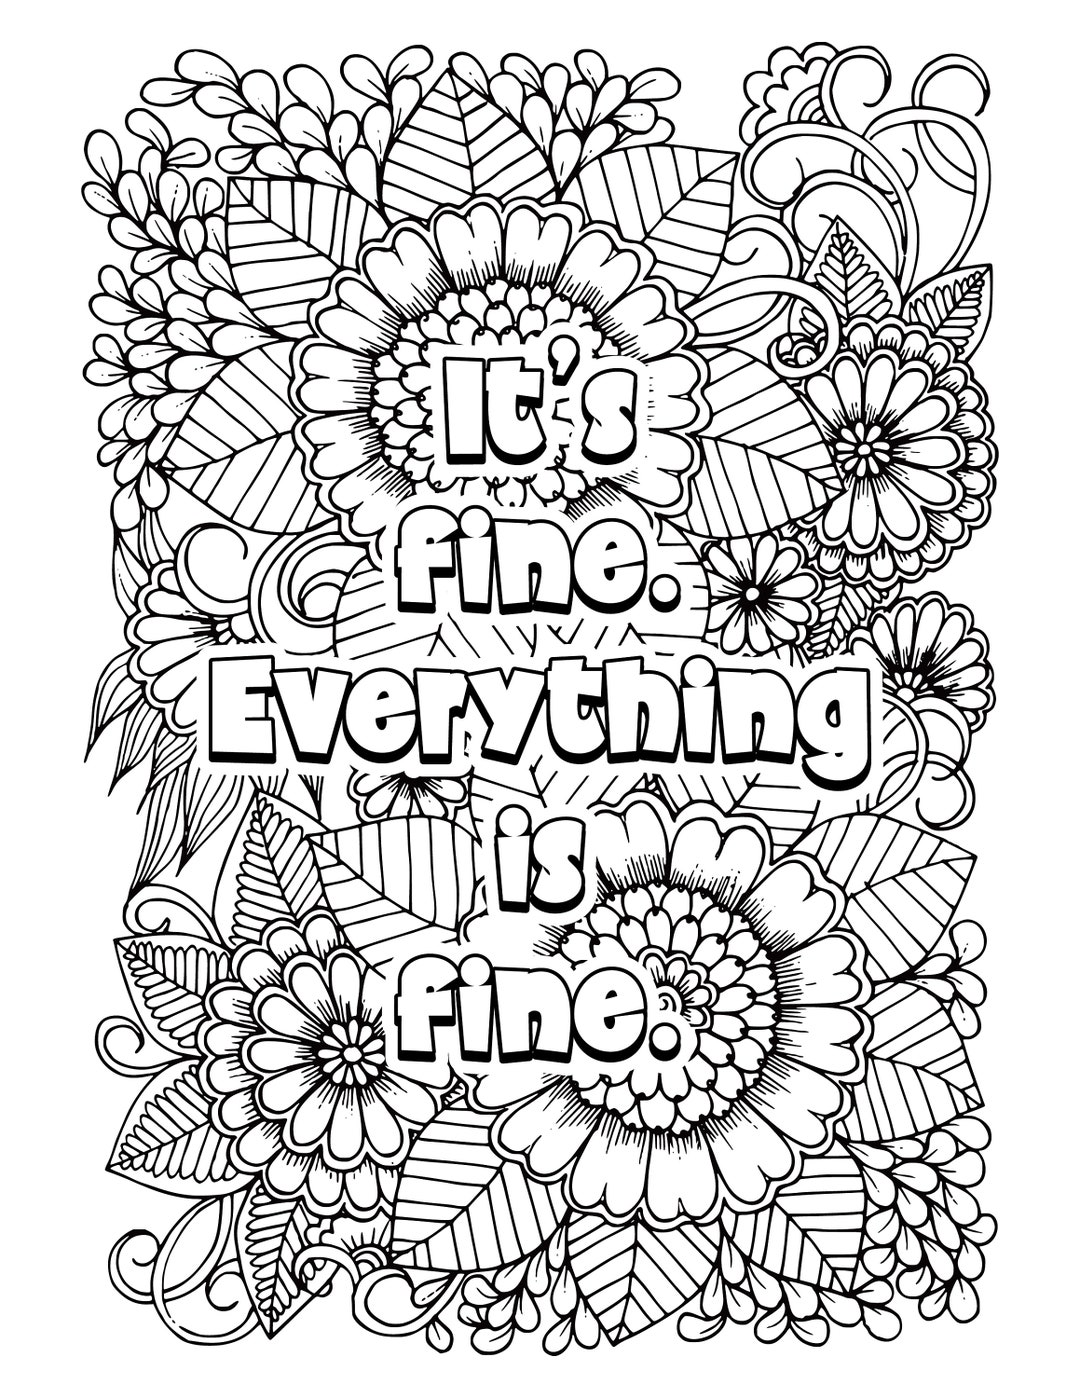 20-funny-adult-coloring-book-printable-pages-etsy